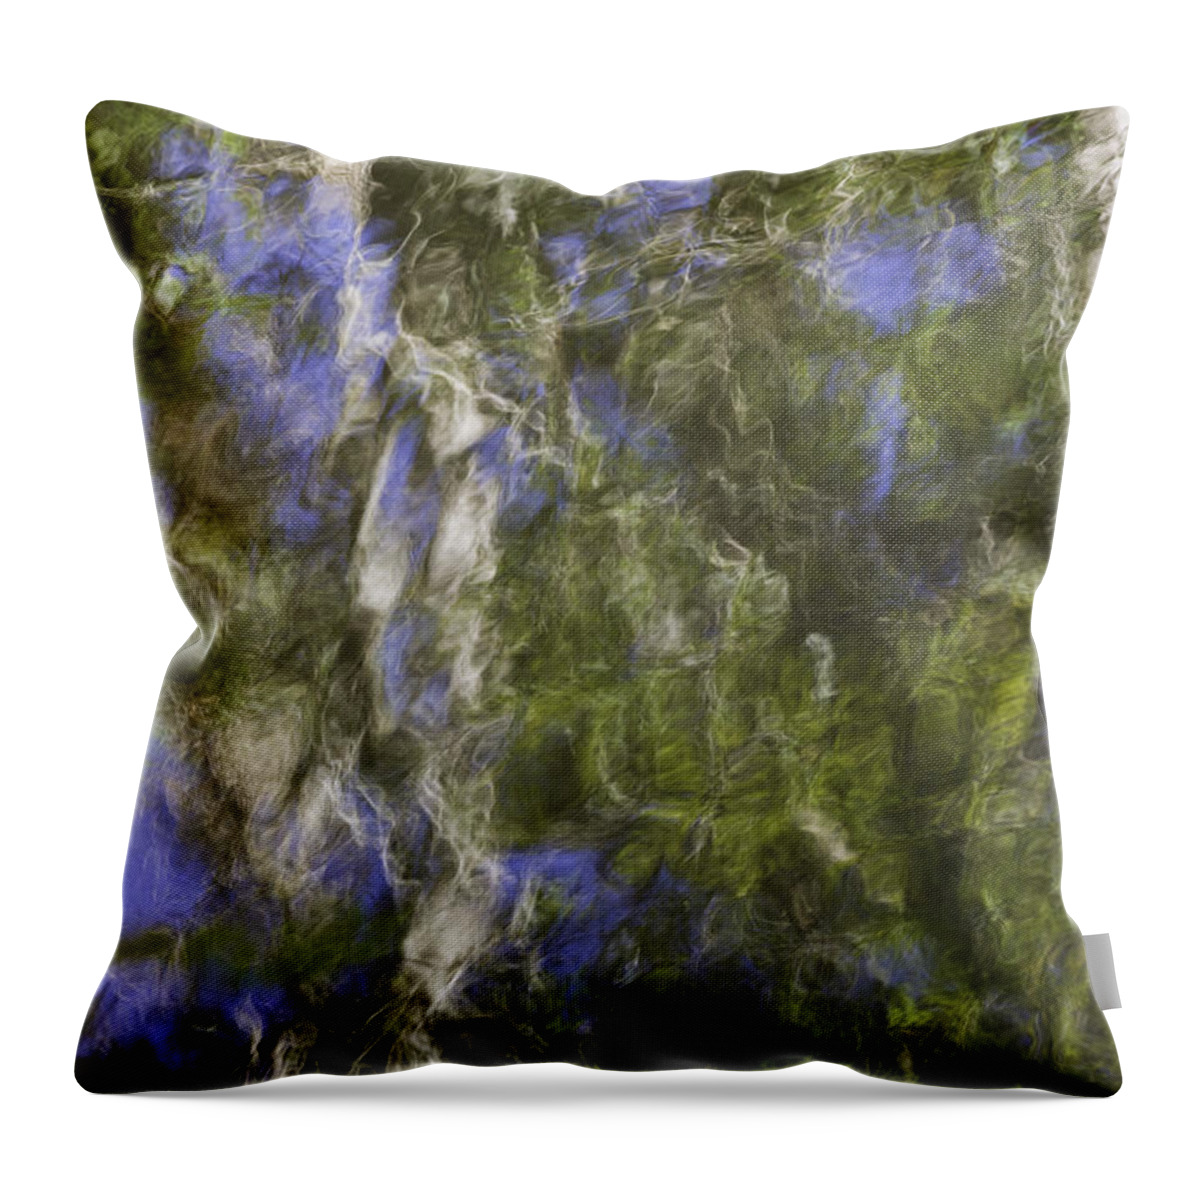 River Throw Pillow featuring the photograph Reflections by Fran Gallogly